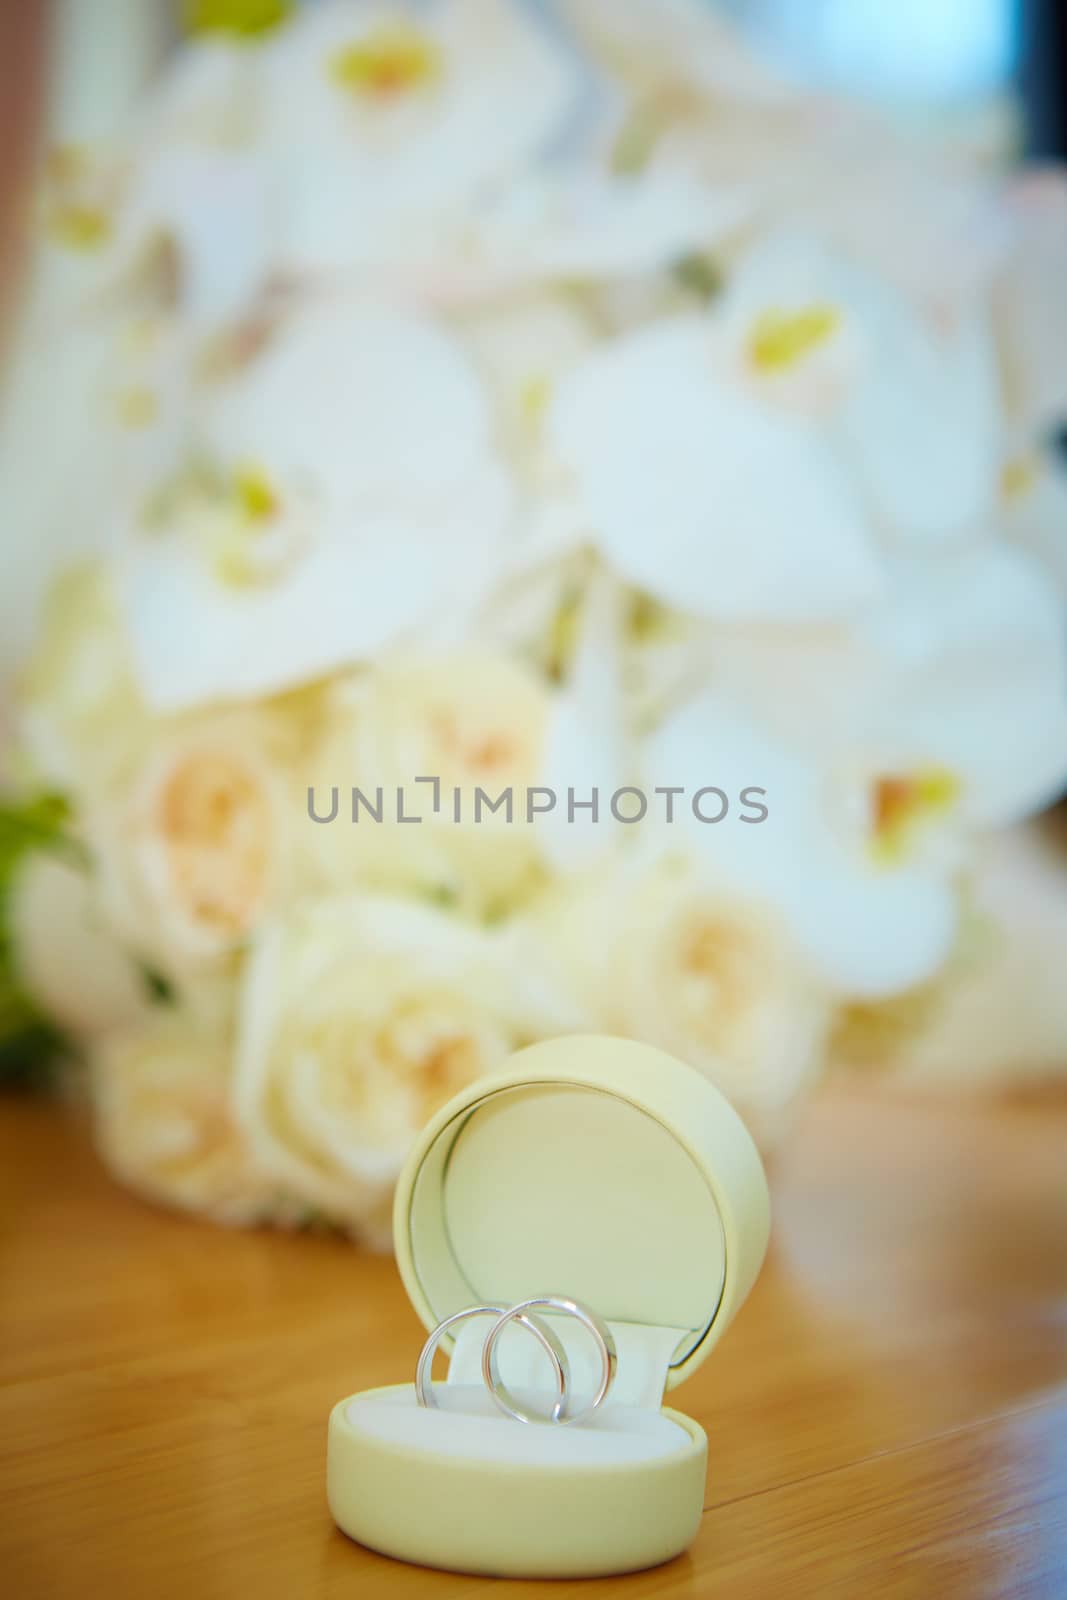 The wedding bouquet and silver rings. Shallow DOF